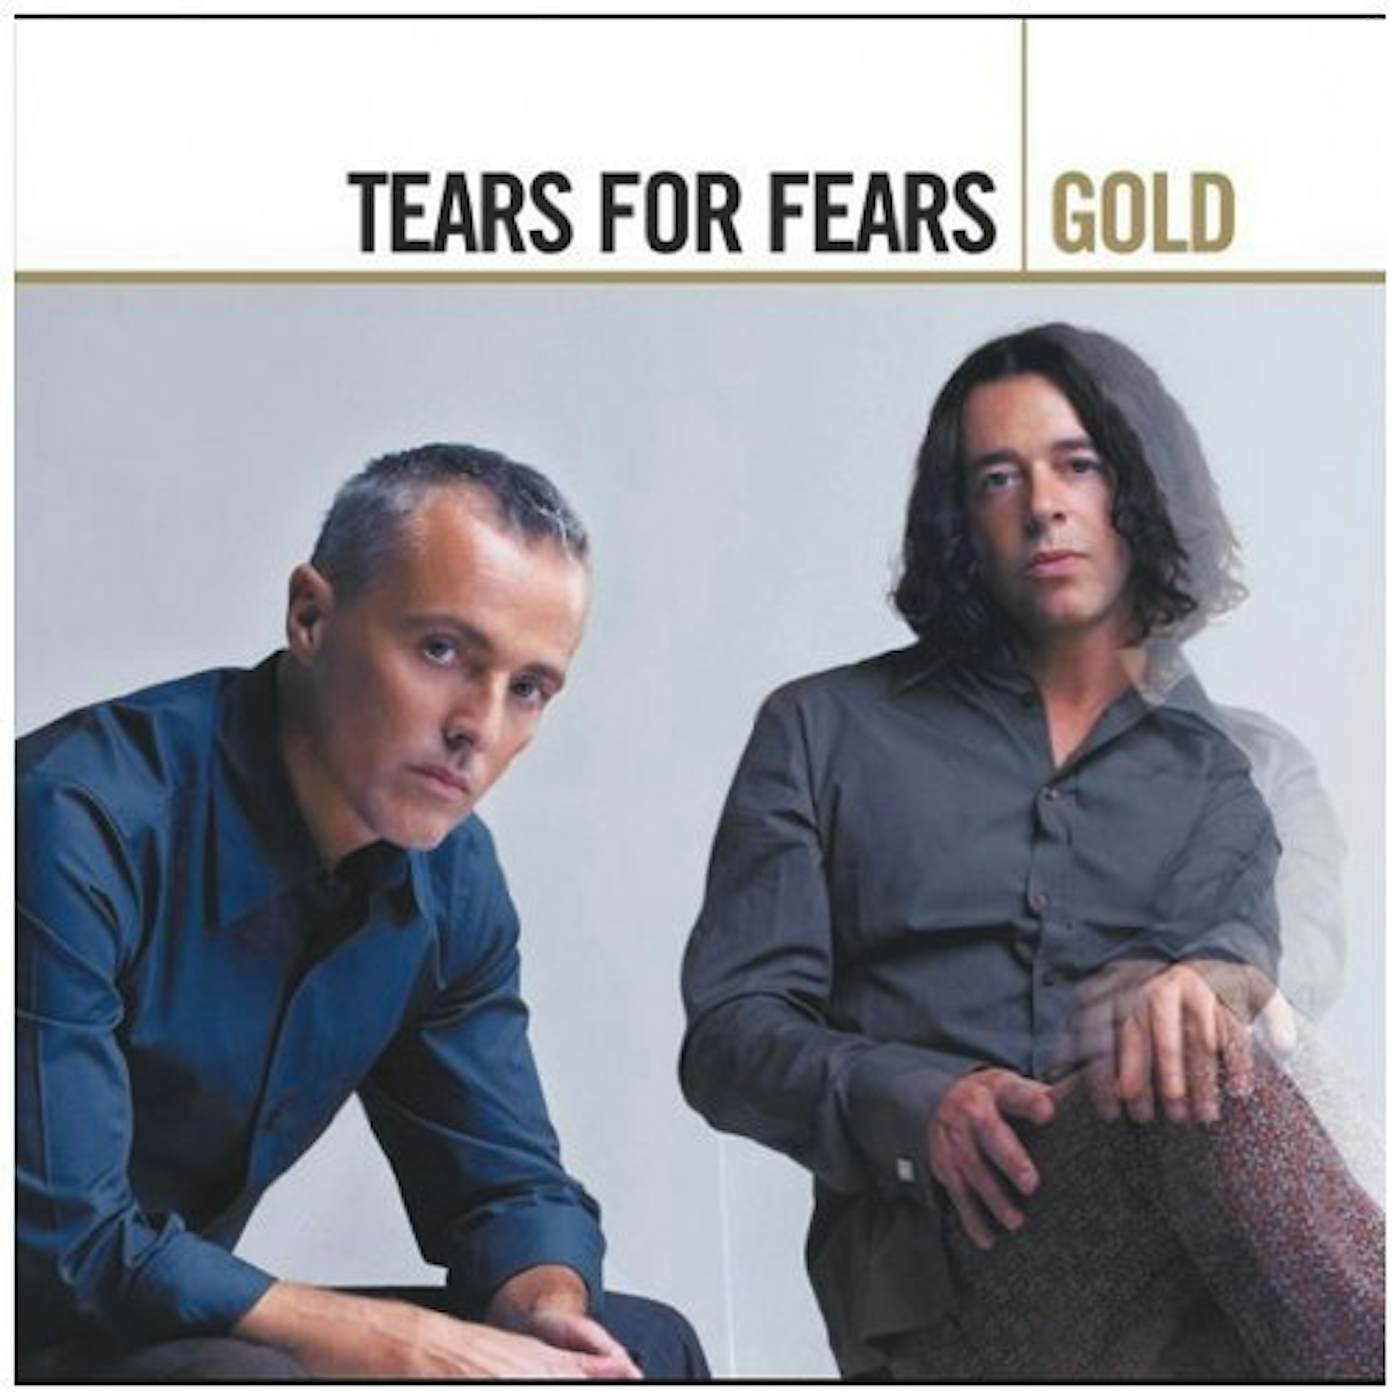 Tears For Fears GOLD CD